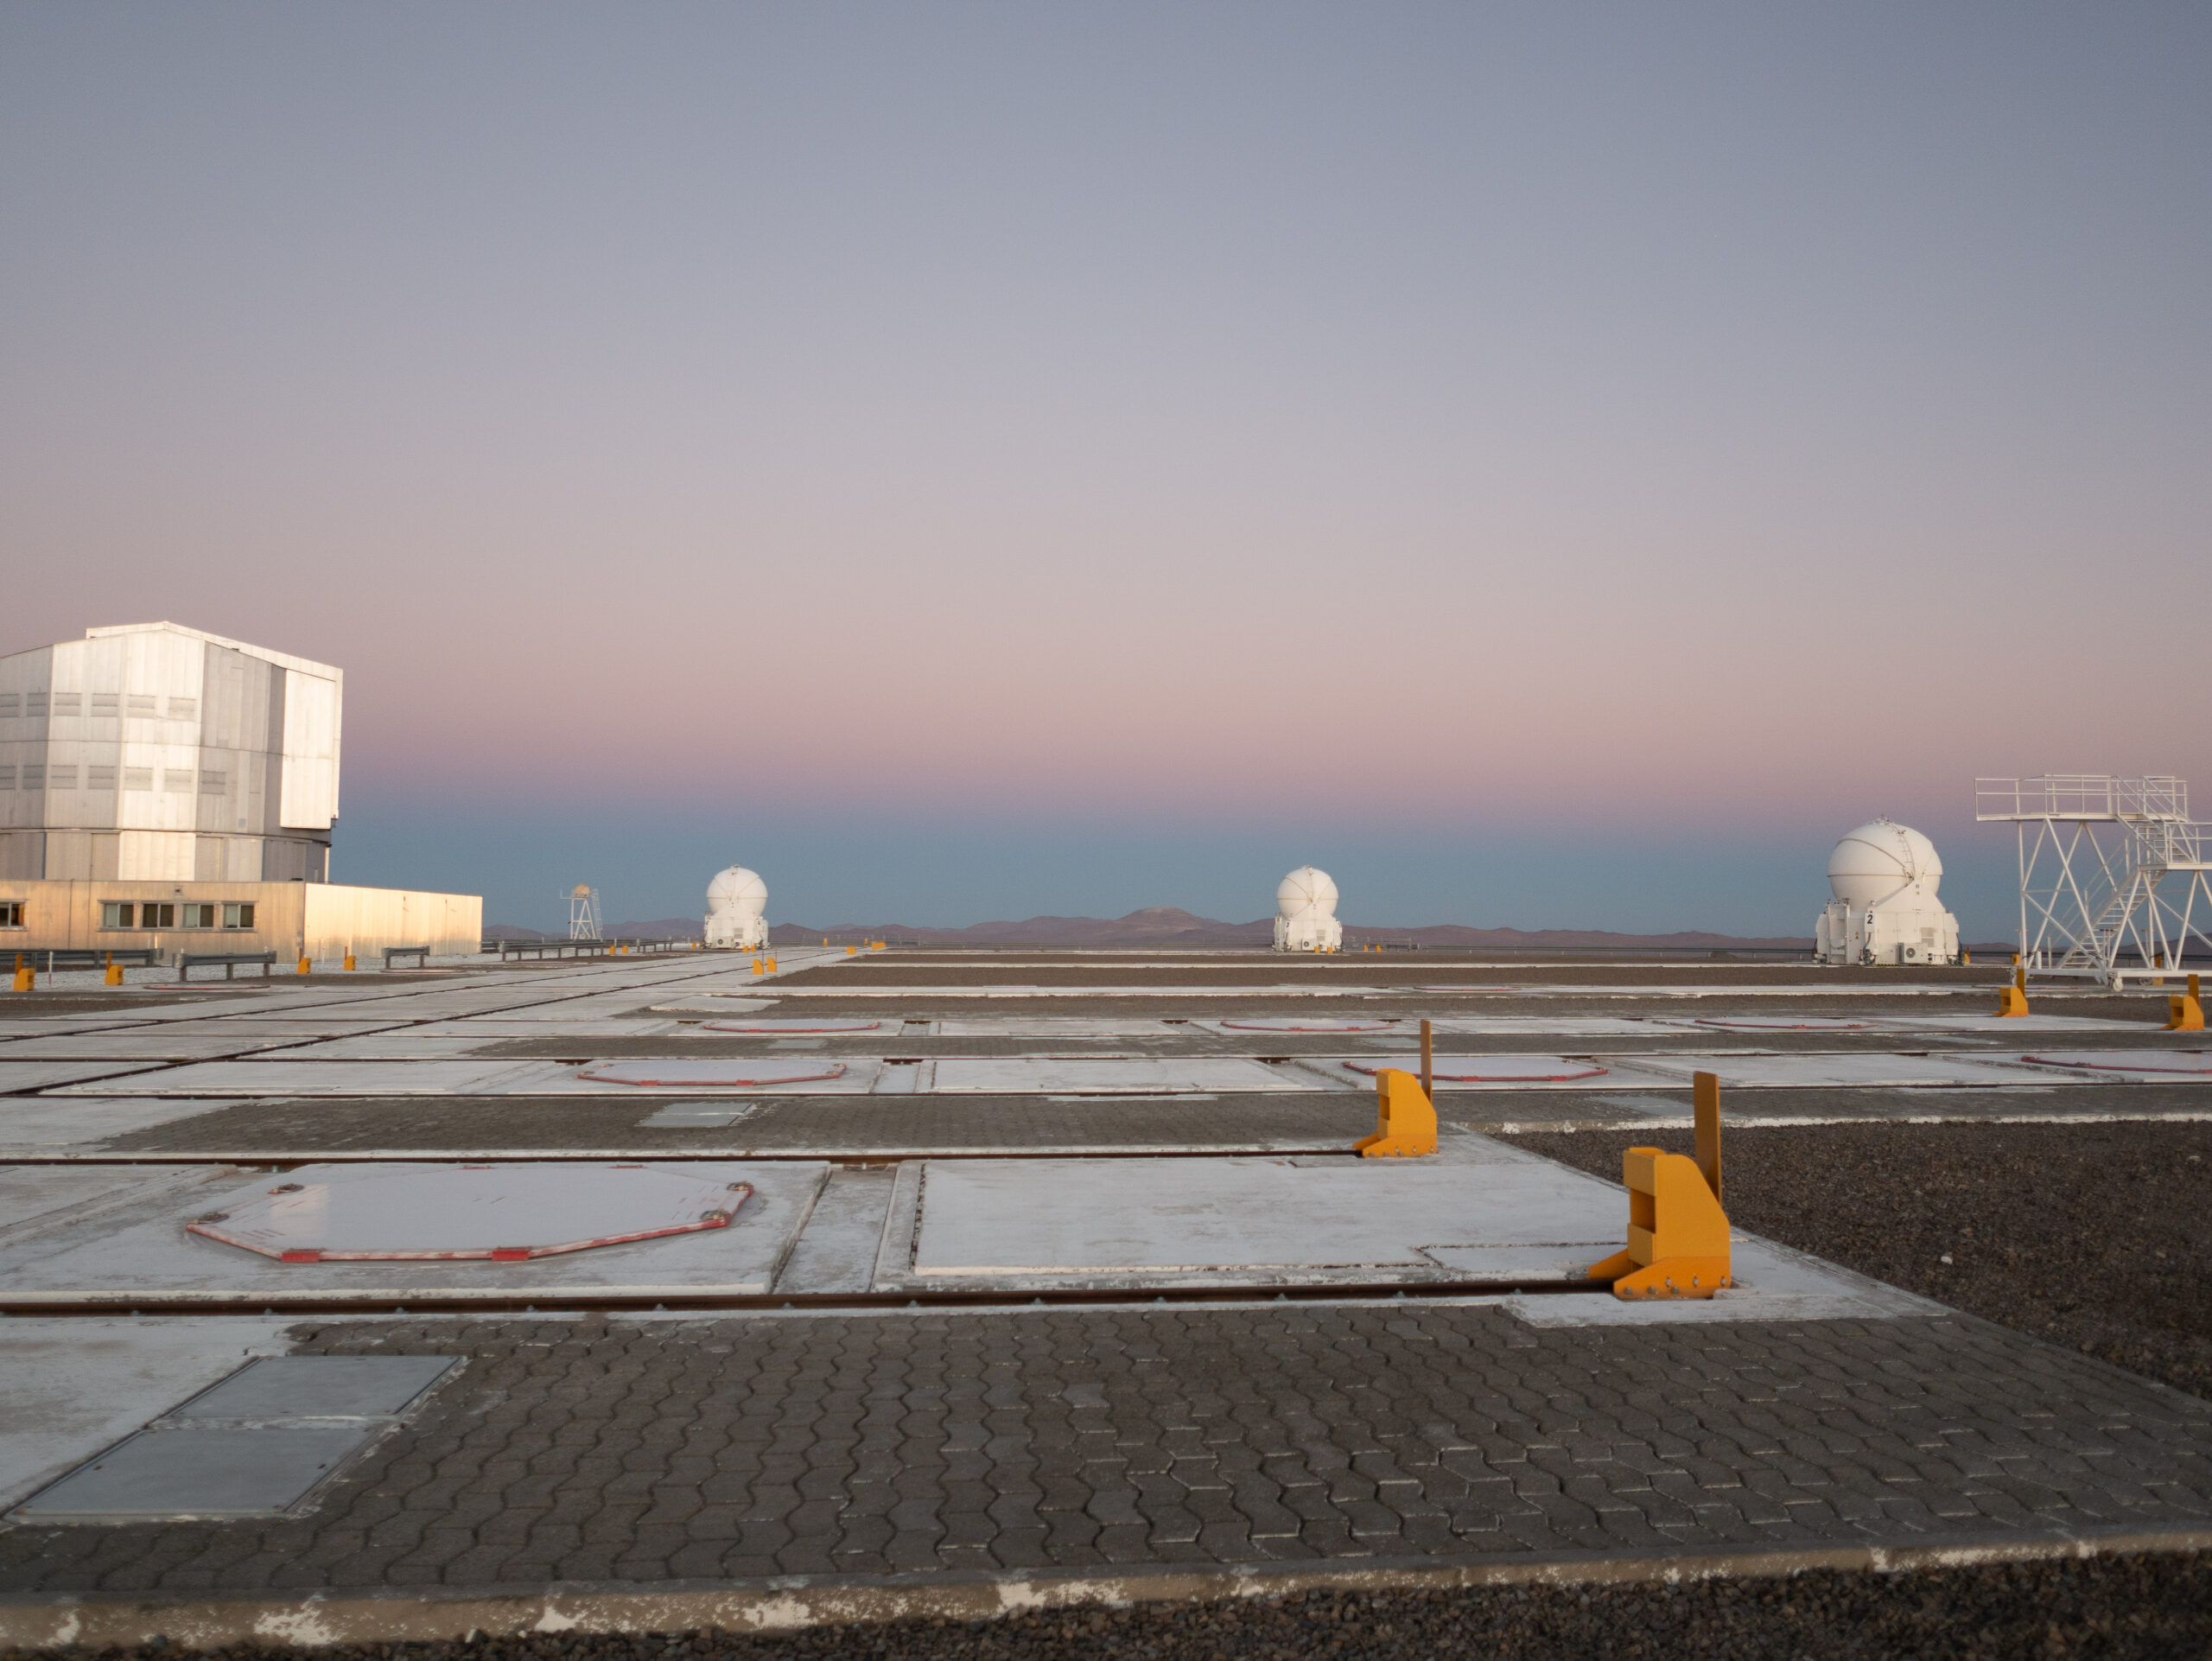 Part of the telescopes at the Paranal observatory in Chile.